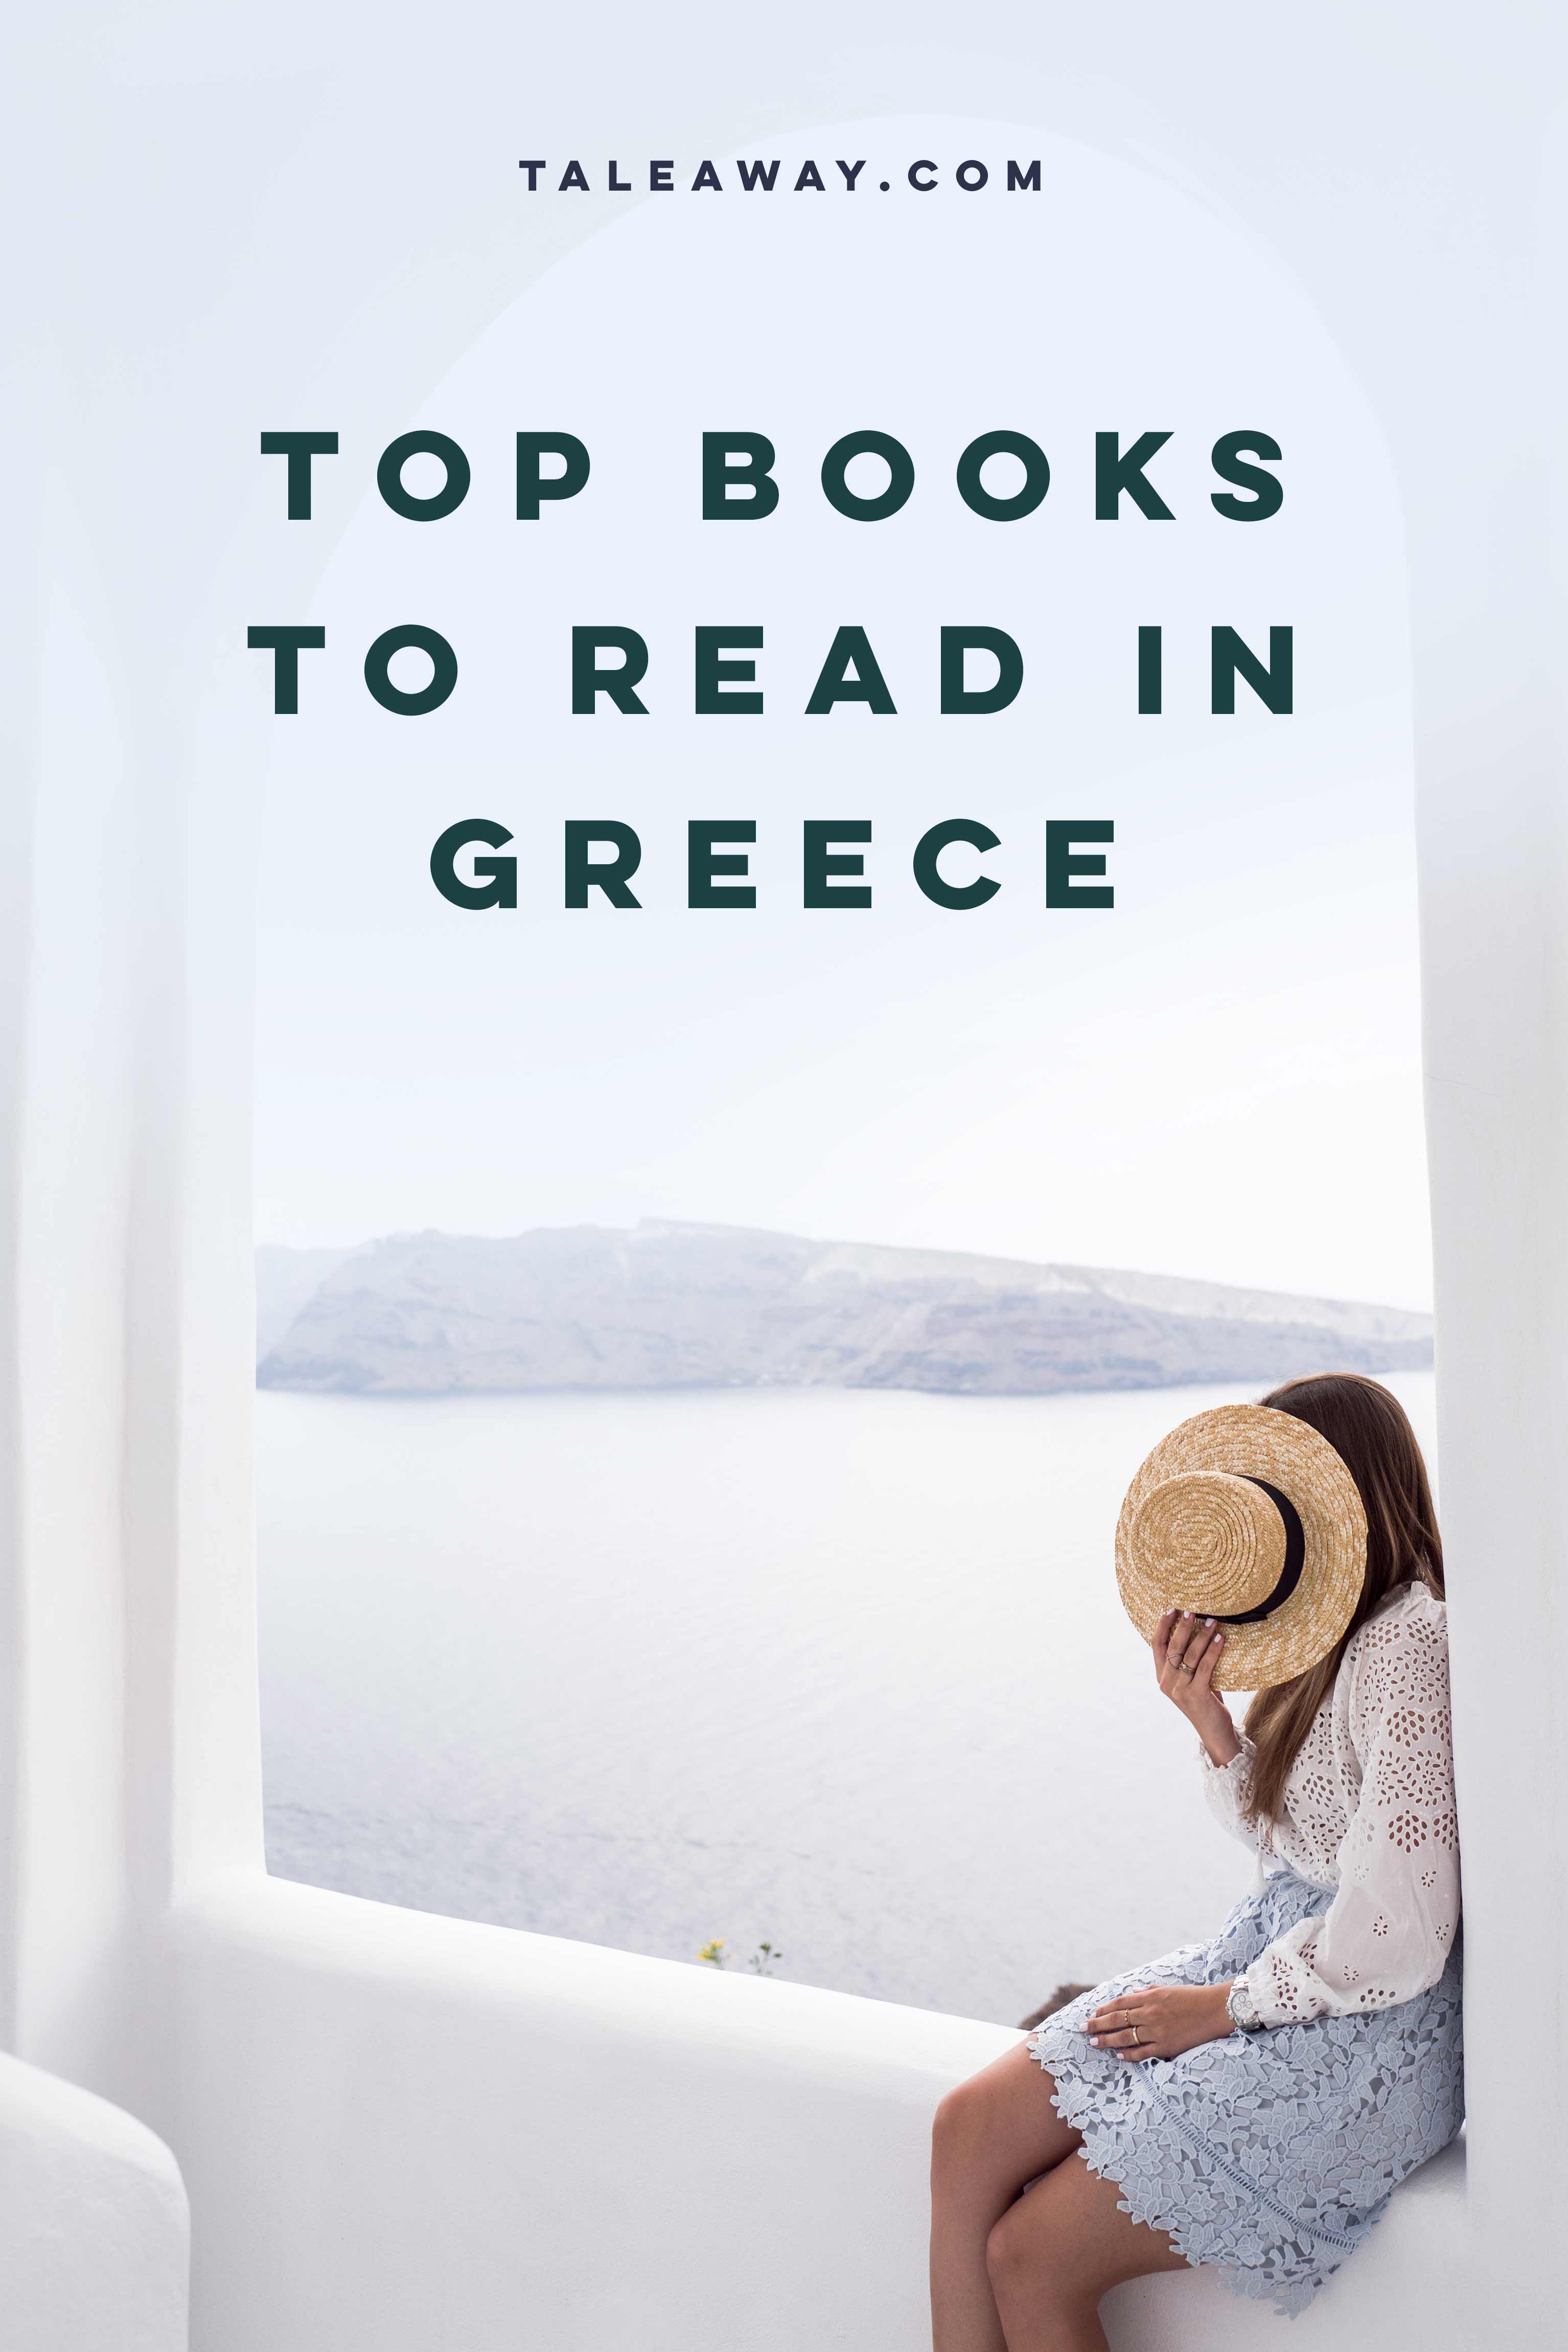 Books Set In Greece. For more books visit www.taleway.com to find books set around the world. Ideas for those who like to travel, both in life and in fiction. #books #novels #fiction #travel #greece